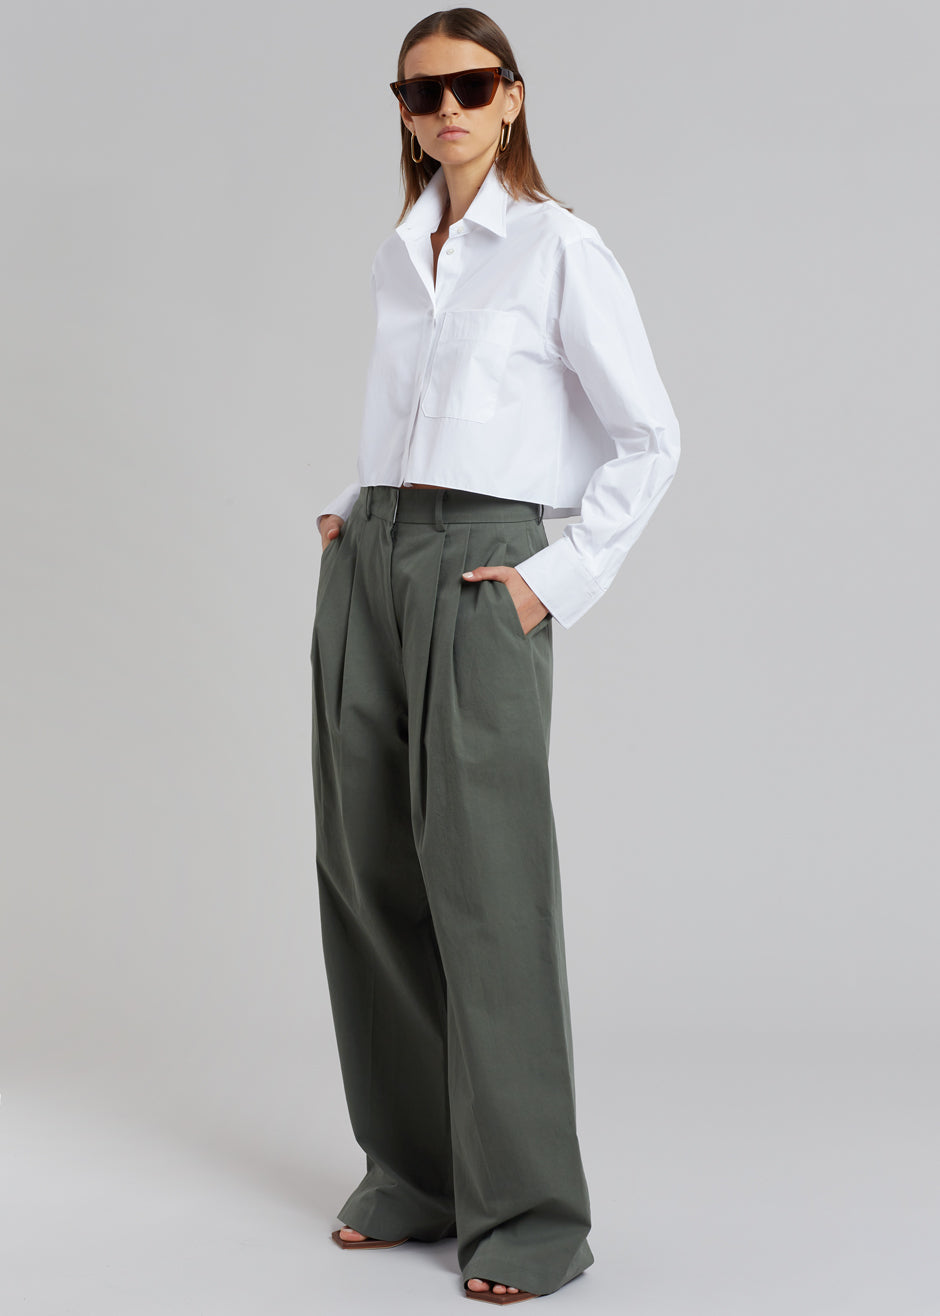 Tansy Cotton Pants - Olive - 2